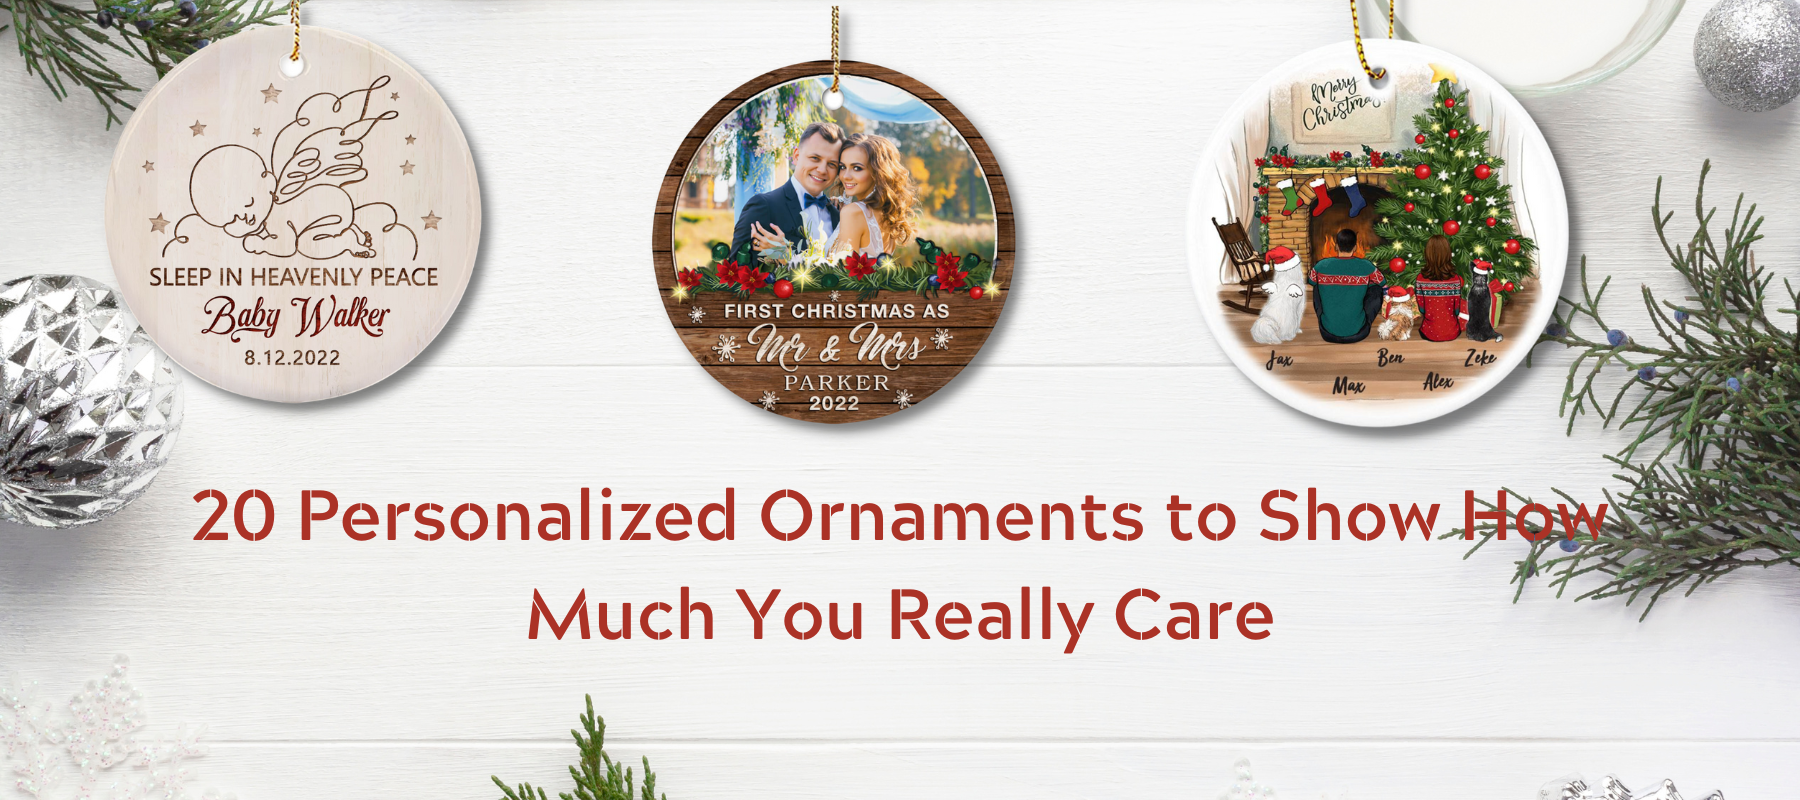 20 Personalized Ornaments to Show How Much You Really Care